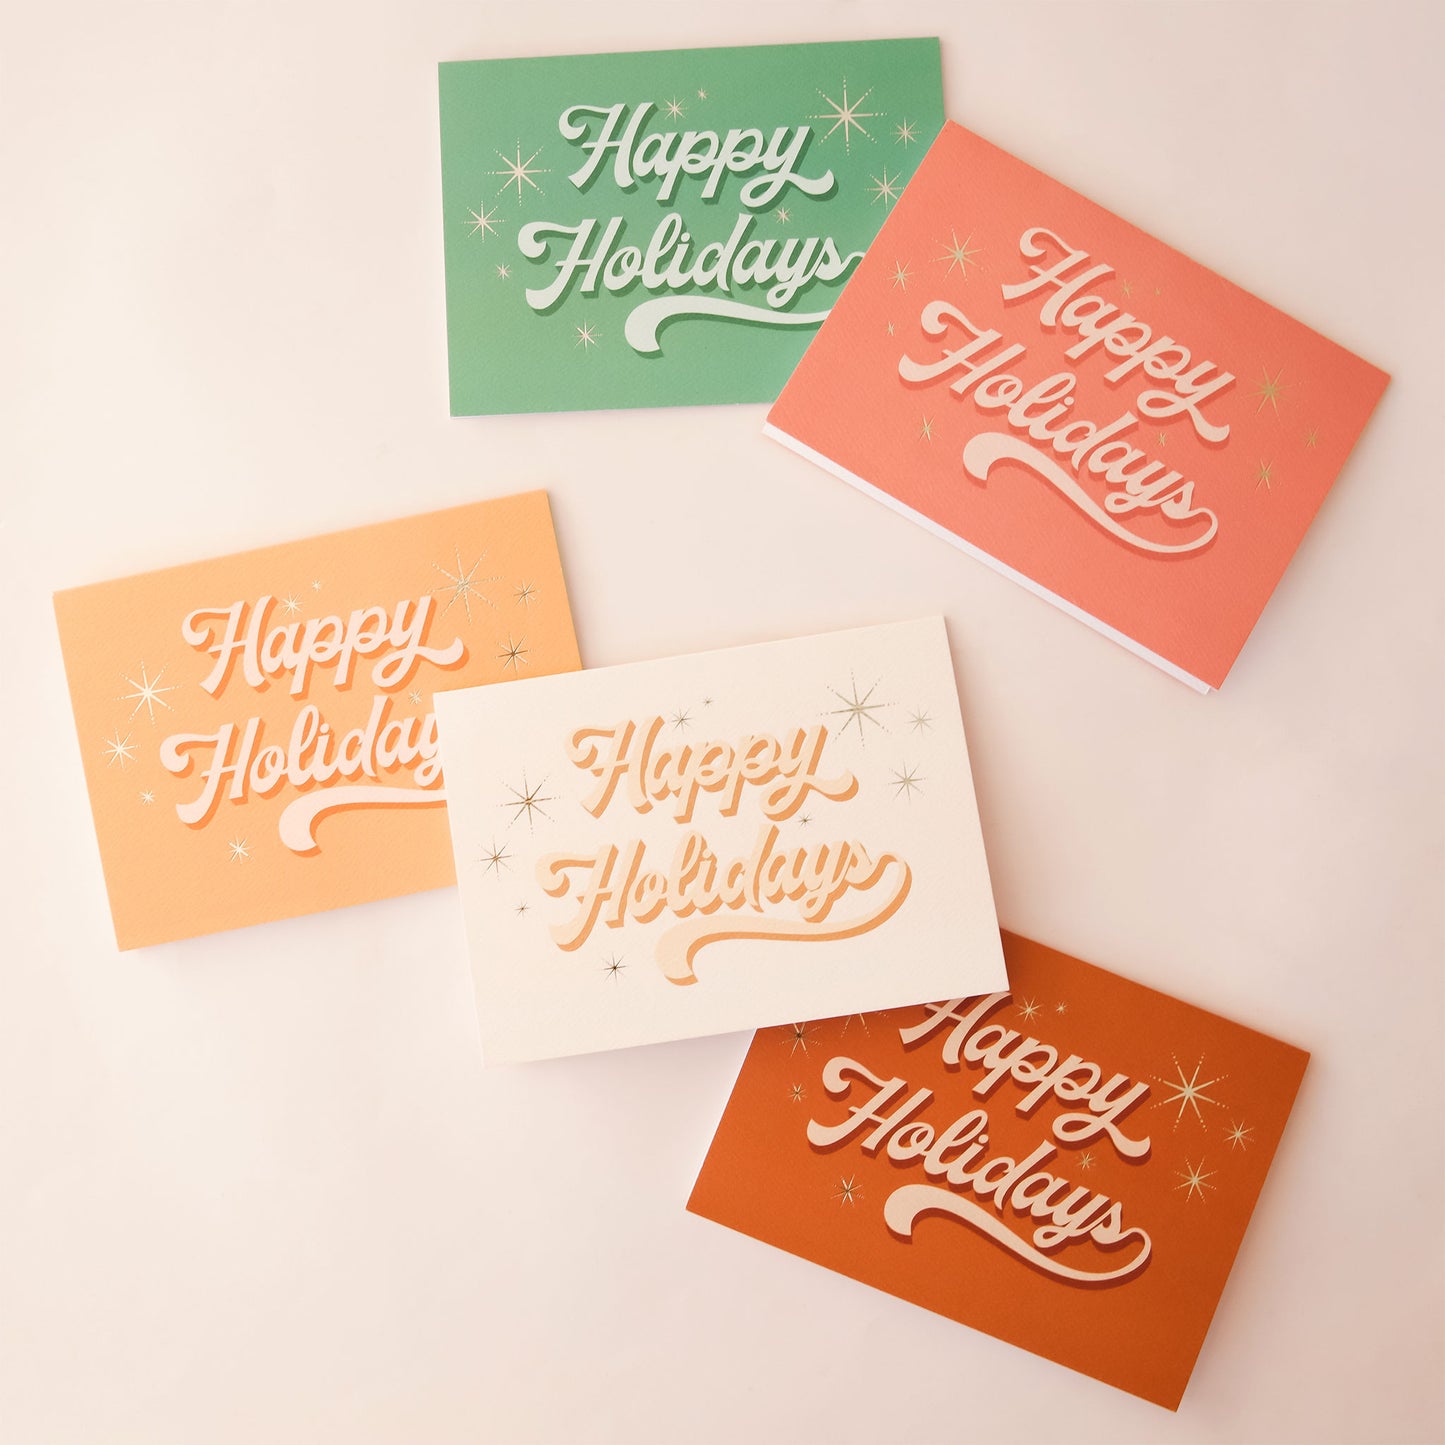 Happy Holidays Card - Pack of 5